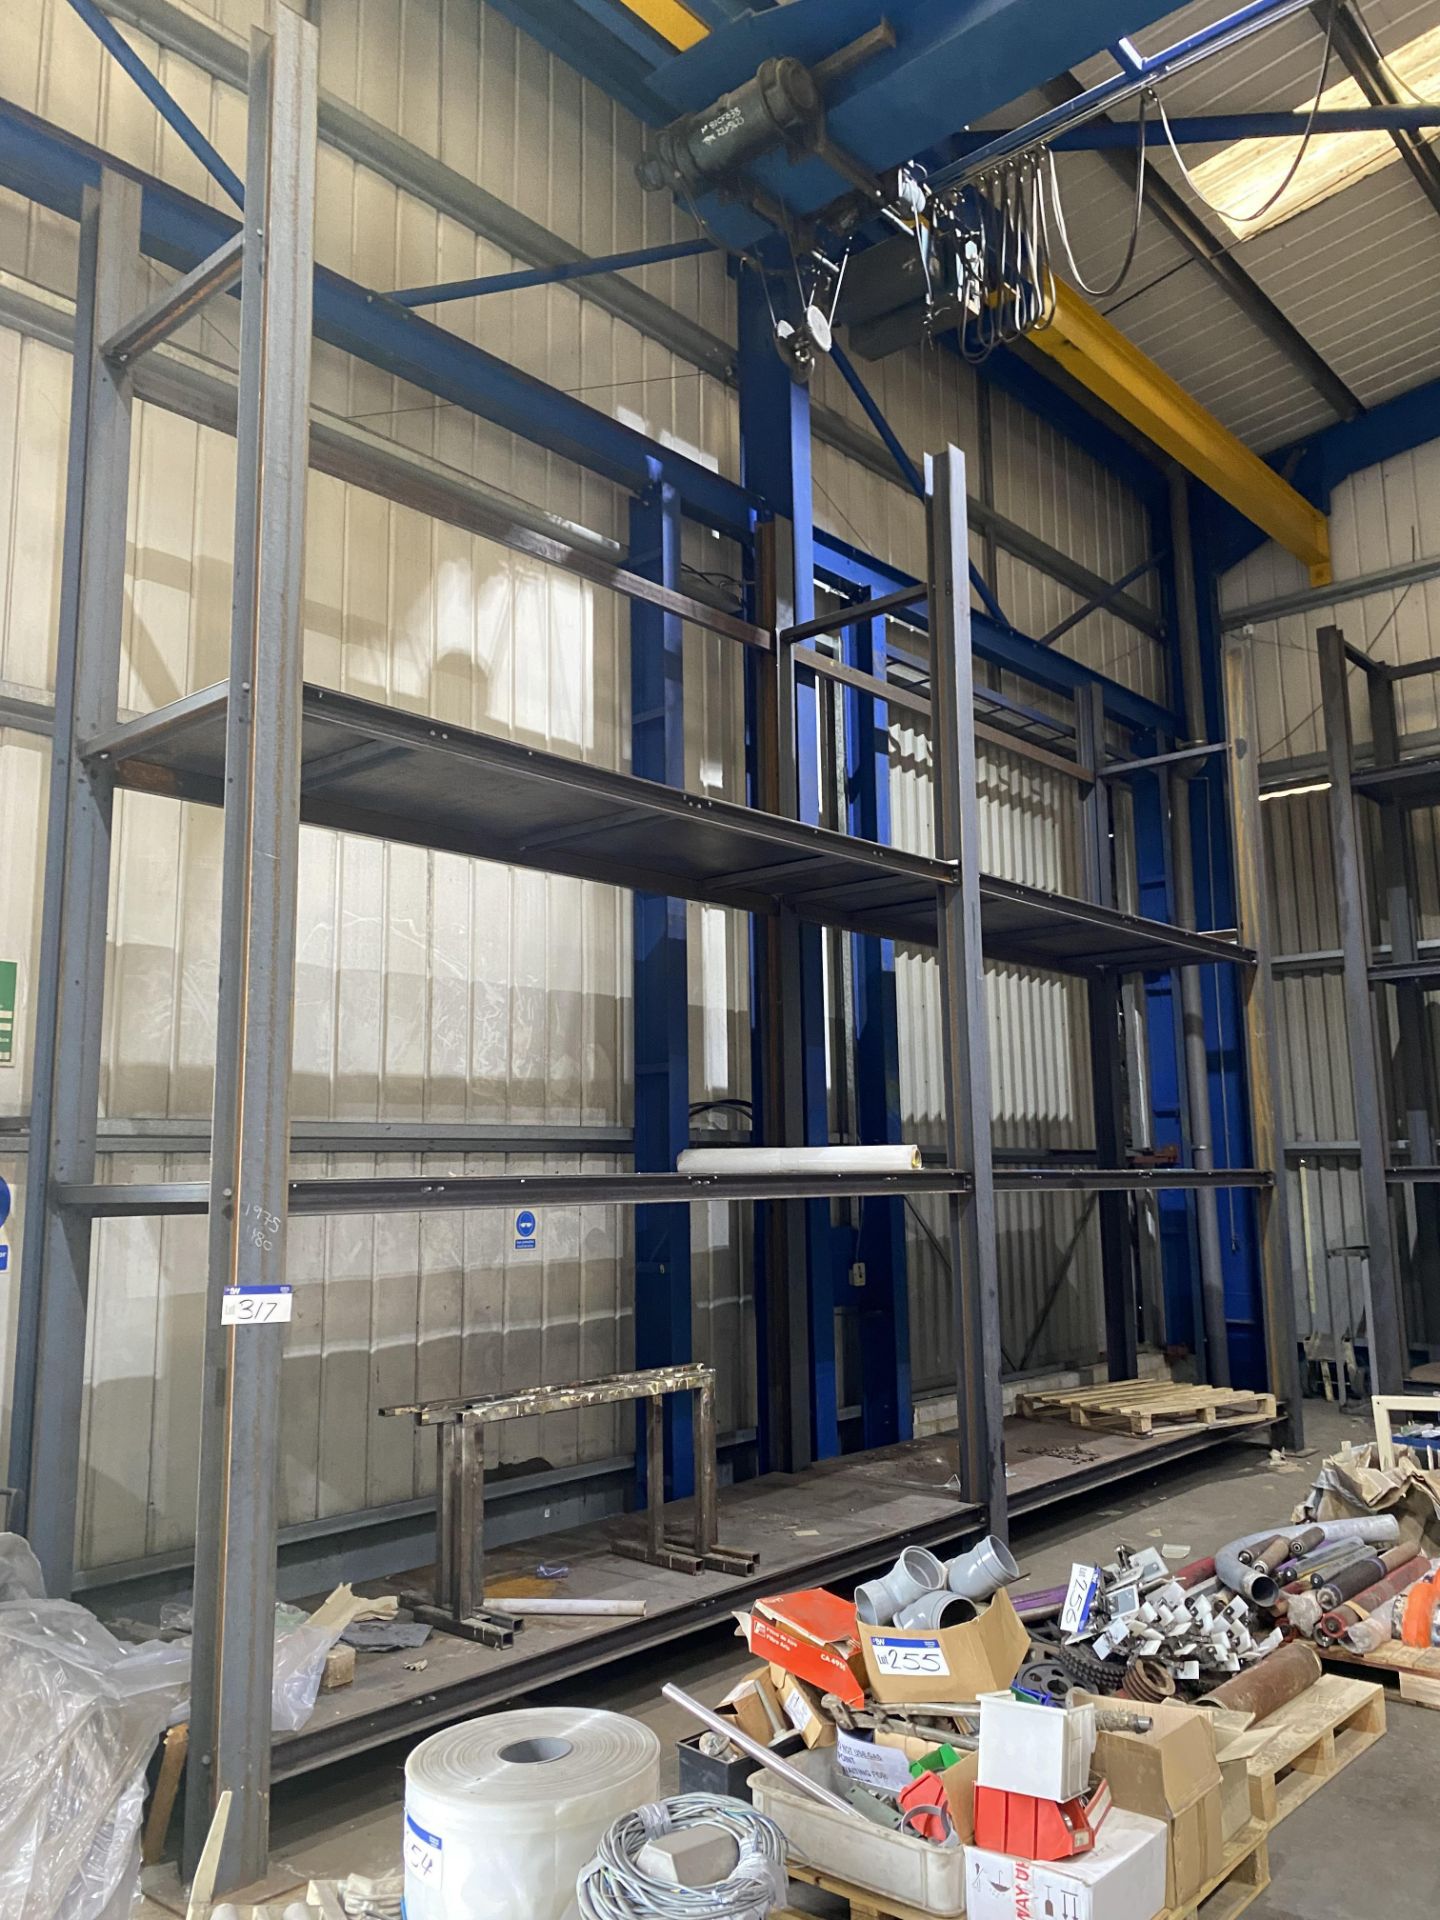 ONE TWO BAY & ONE SINGLE BAY BOLTED STEEL HEAVY DUTY RACKS, two bay rack approx. 7.9m x 1.3m x 5. - Image 2 of 3